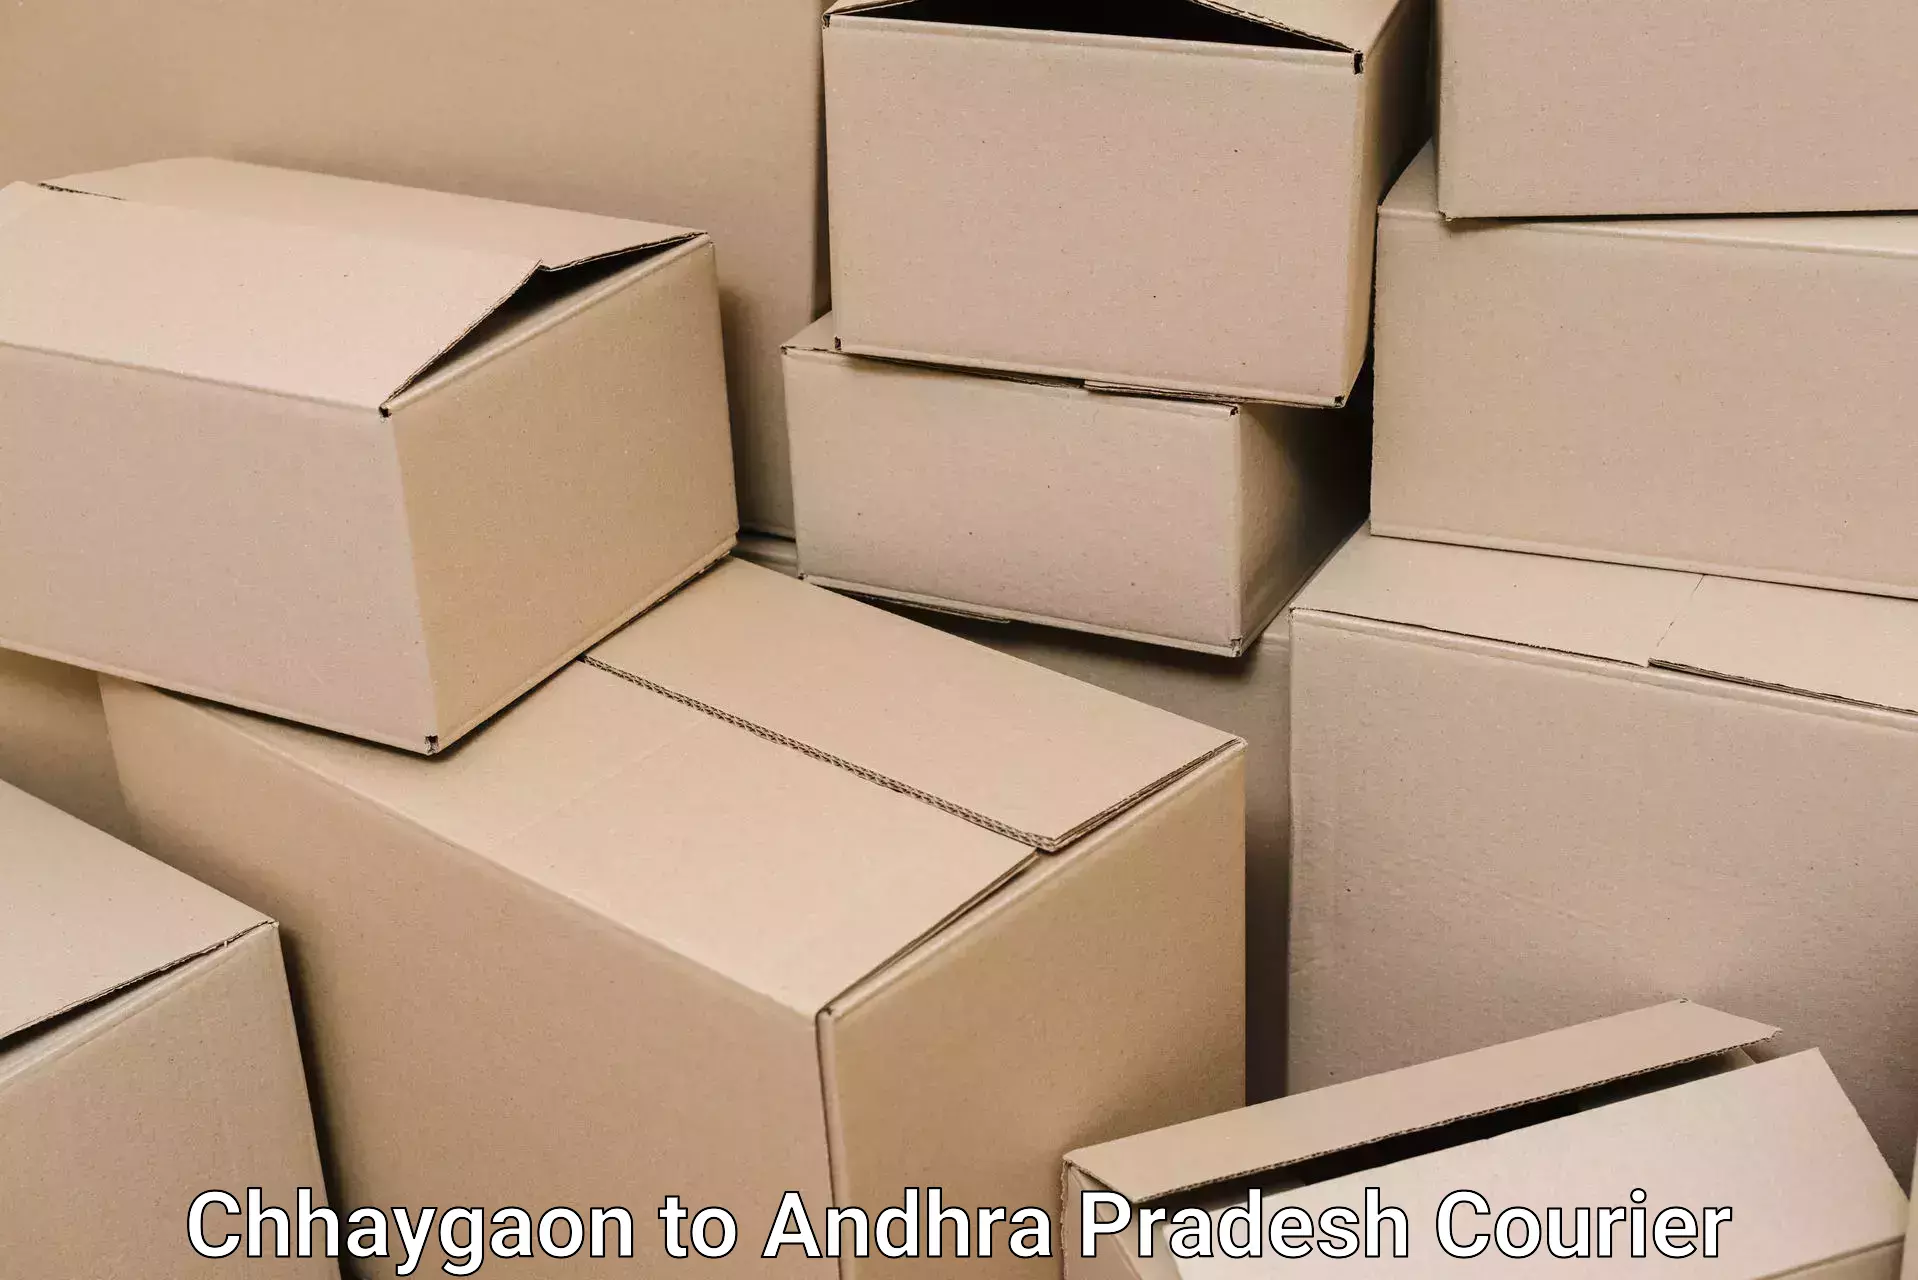 Furniture transport specialists Chhaygaon to Anantapur